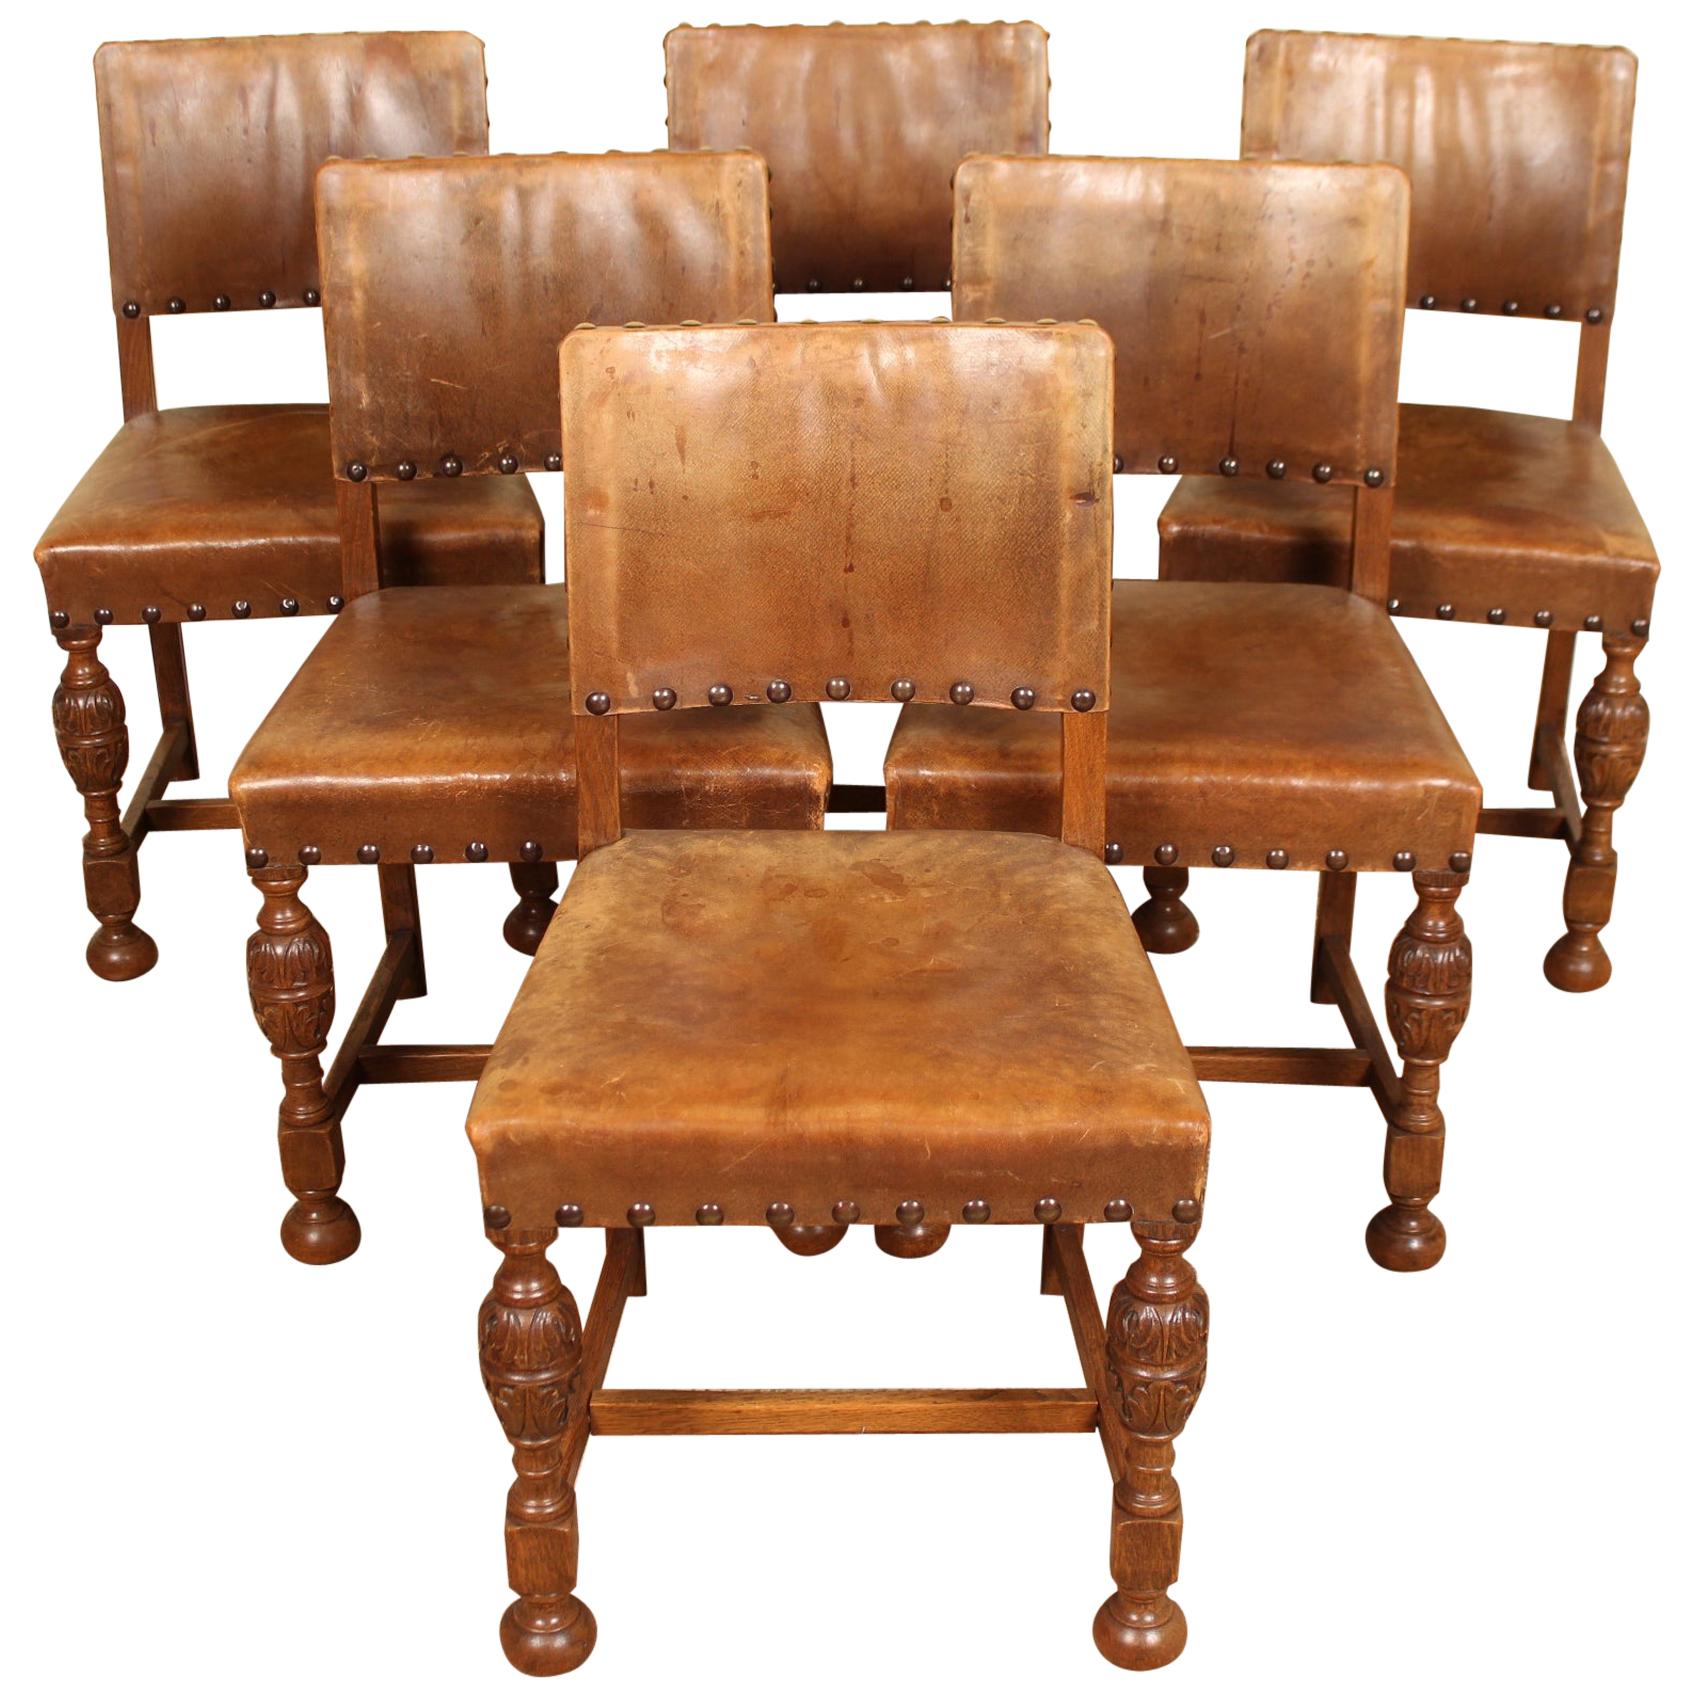 English Oak Refectory Dining Table and 6 Chairs Tan Leather For Sale